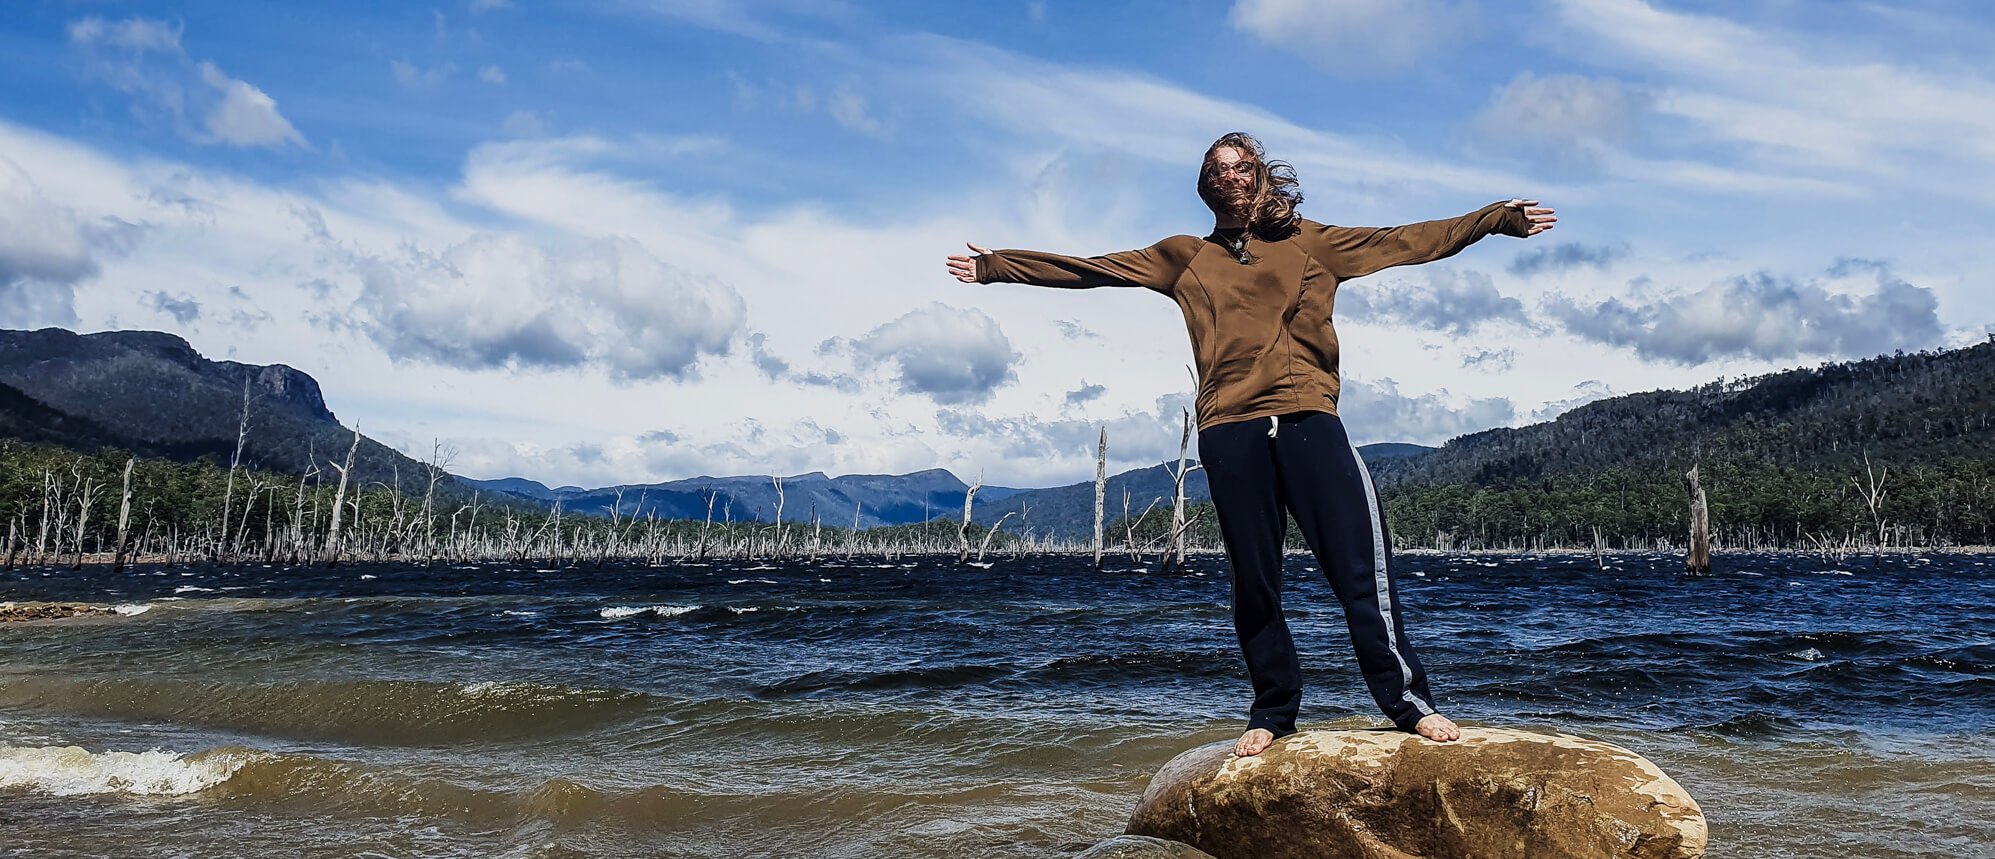 A man backpacking Tasmania poses in front of a lake near The Walls of Jerusalem